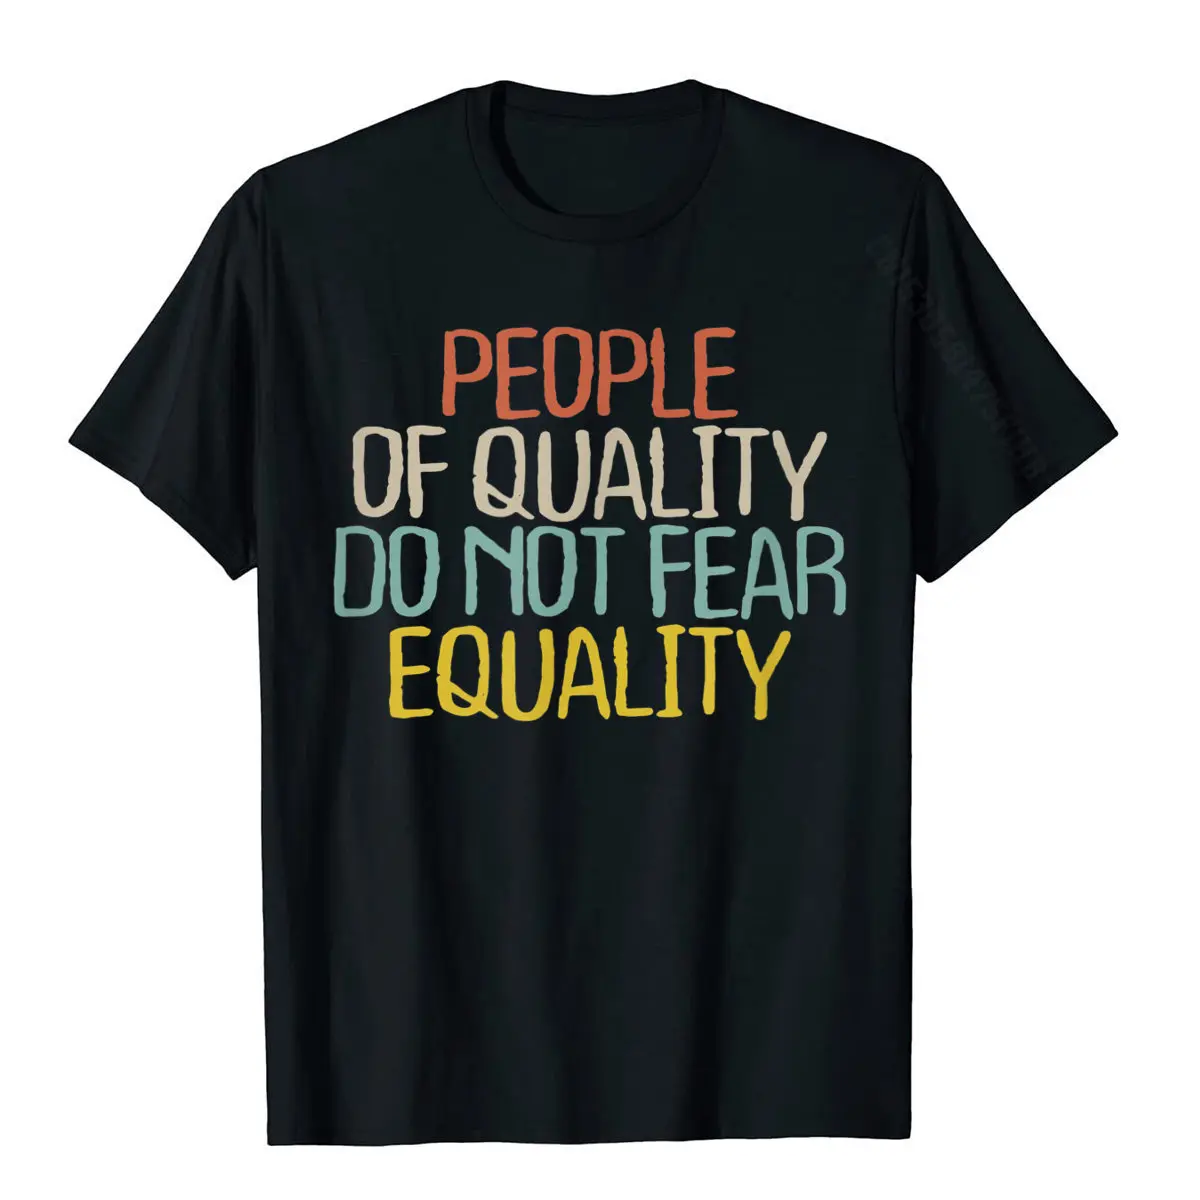 Funny People Of Quality Do Not Fear Equality Novelty Gift T-Shirt Camisa Cotton Men Tops & Tees Gift Plain T Shirt